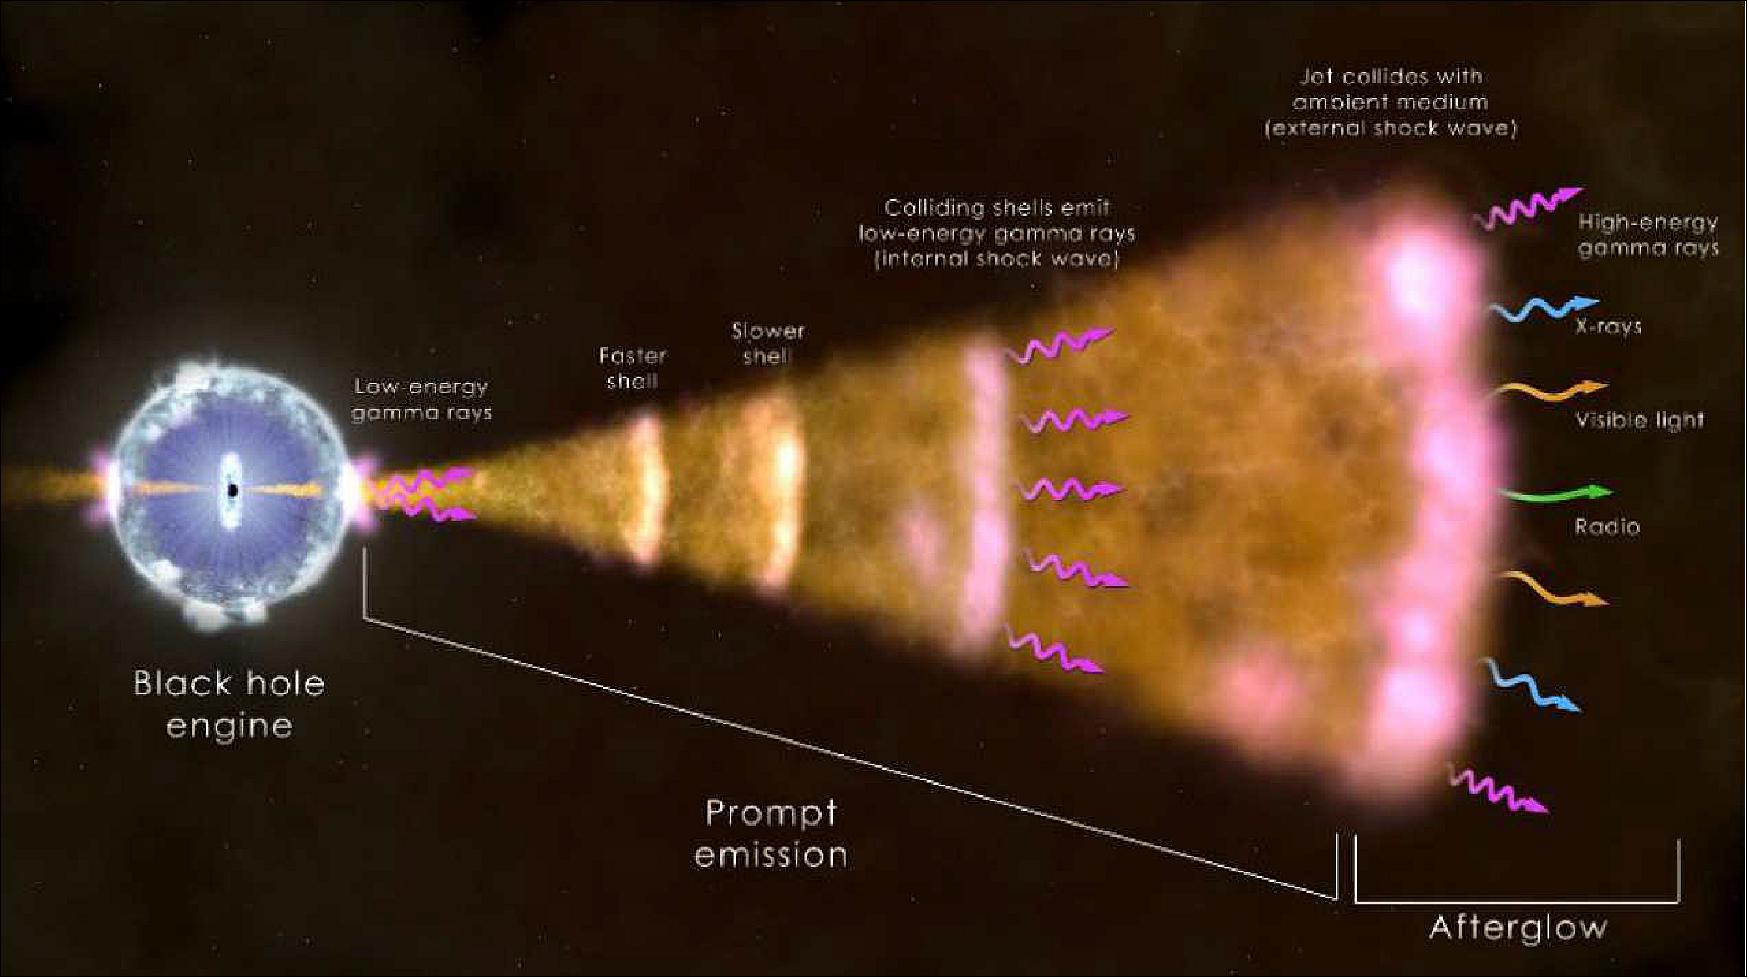 Figure 2: Artist's rendition of the formation of GRBs (Gamma-Ray Bursts), image credit: NASA/GSFC